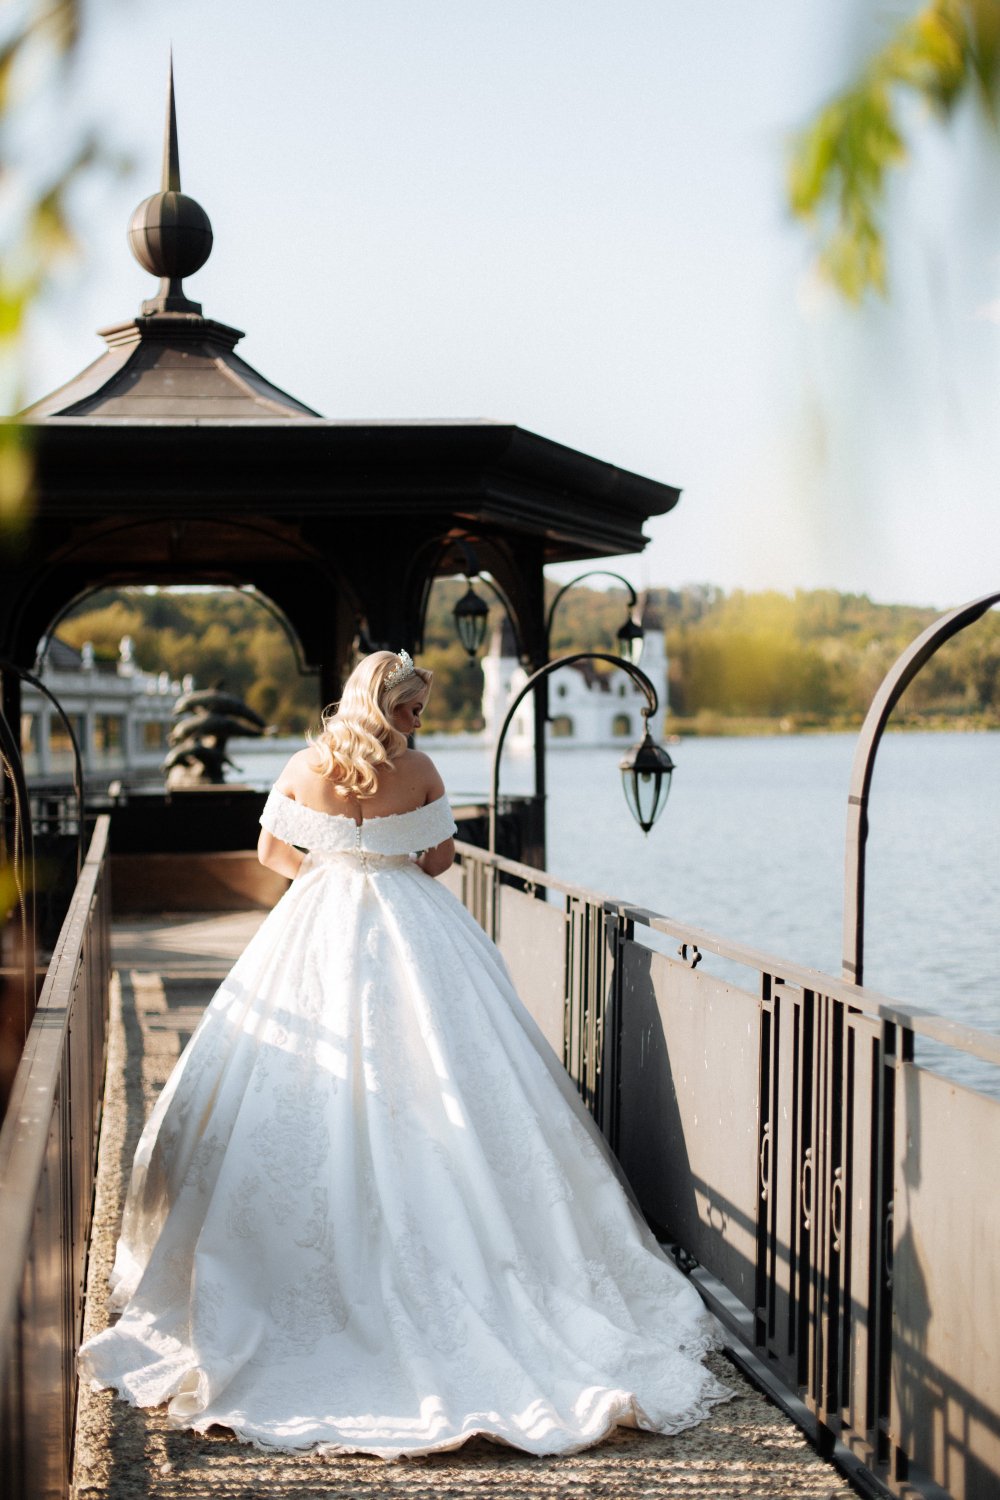 bride in a white wedding dress with a long train is standing in a green park